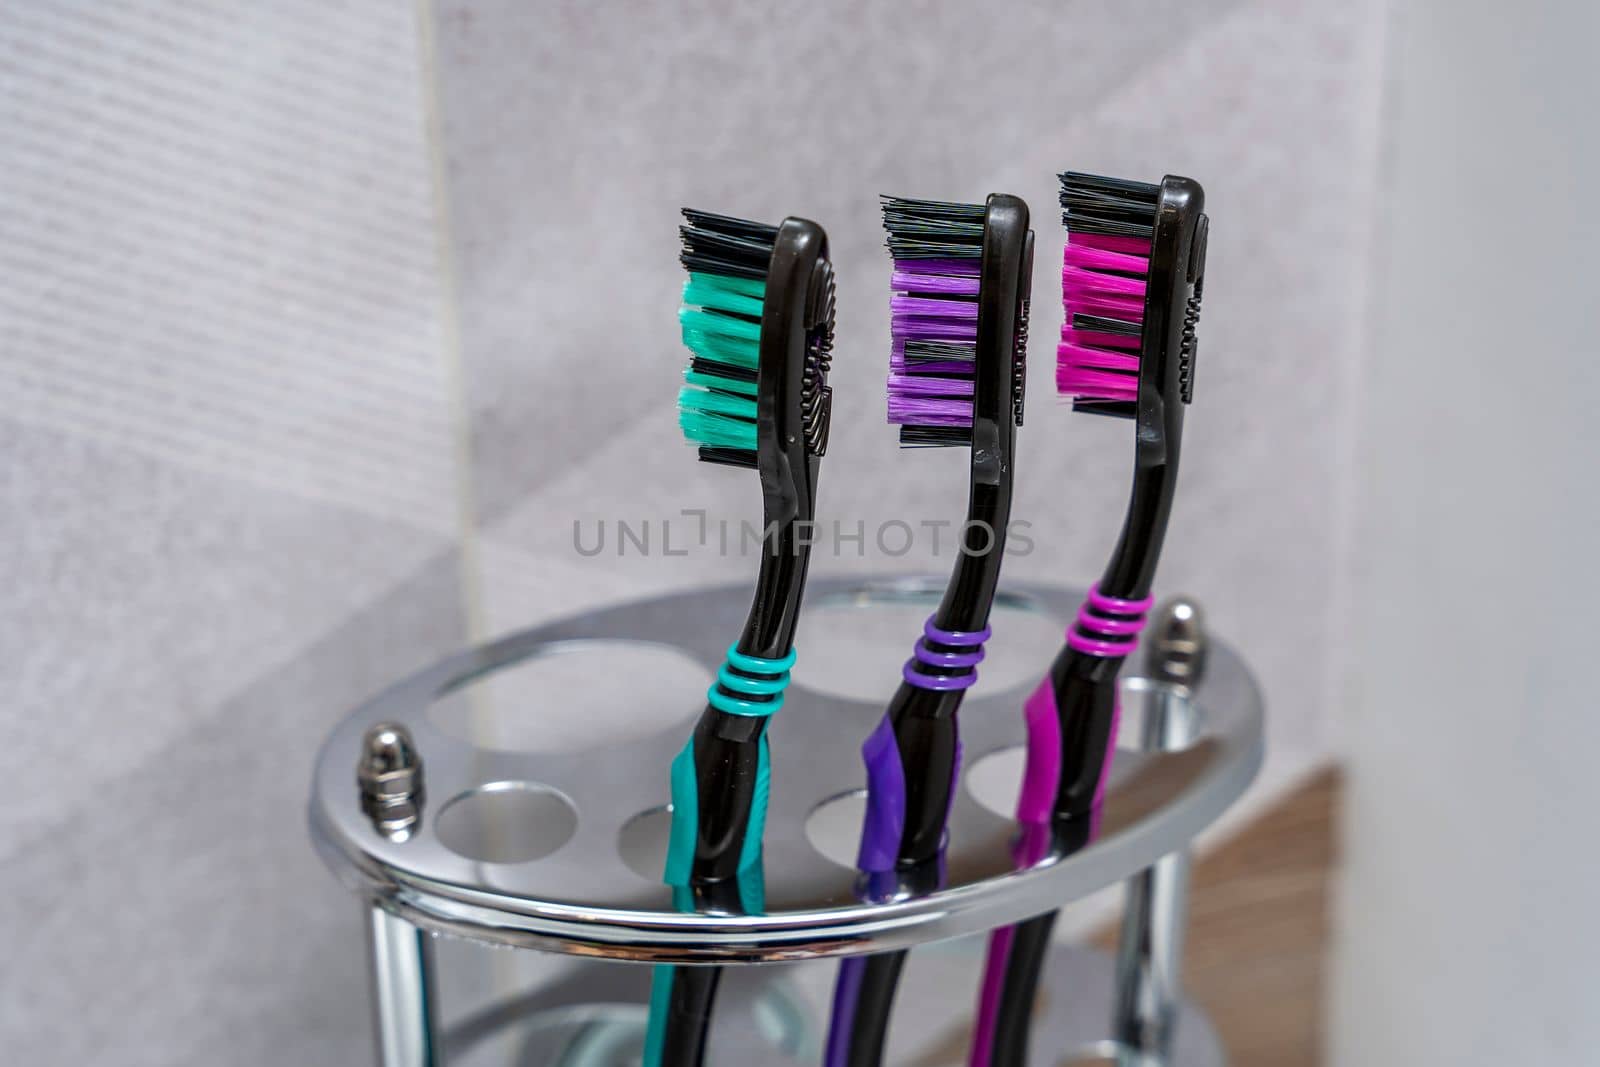 toothbrushes stand in a special stand in the bathroom interior by audiznam2609